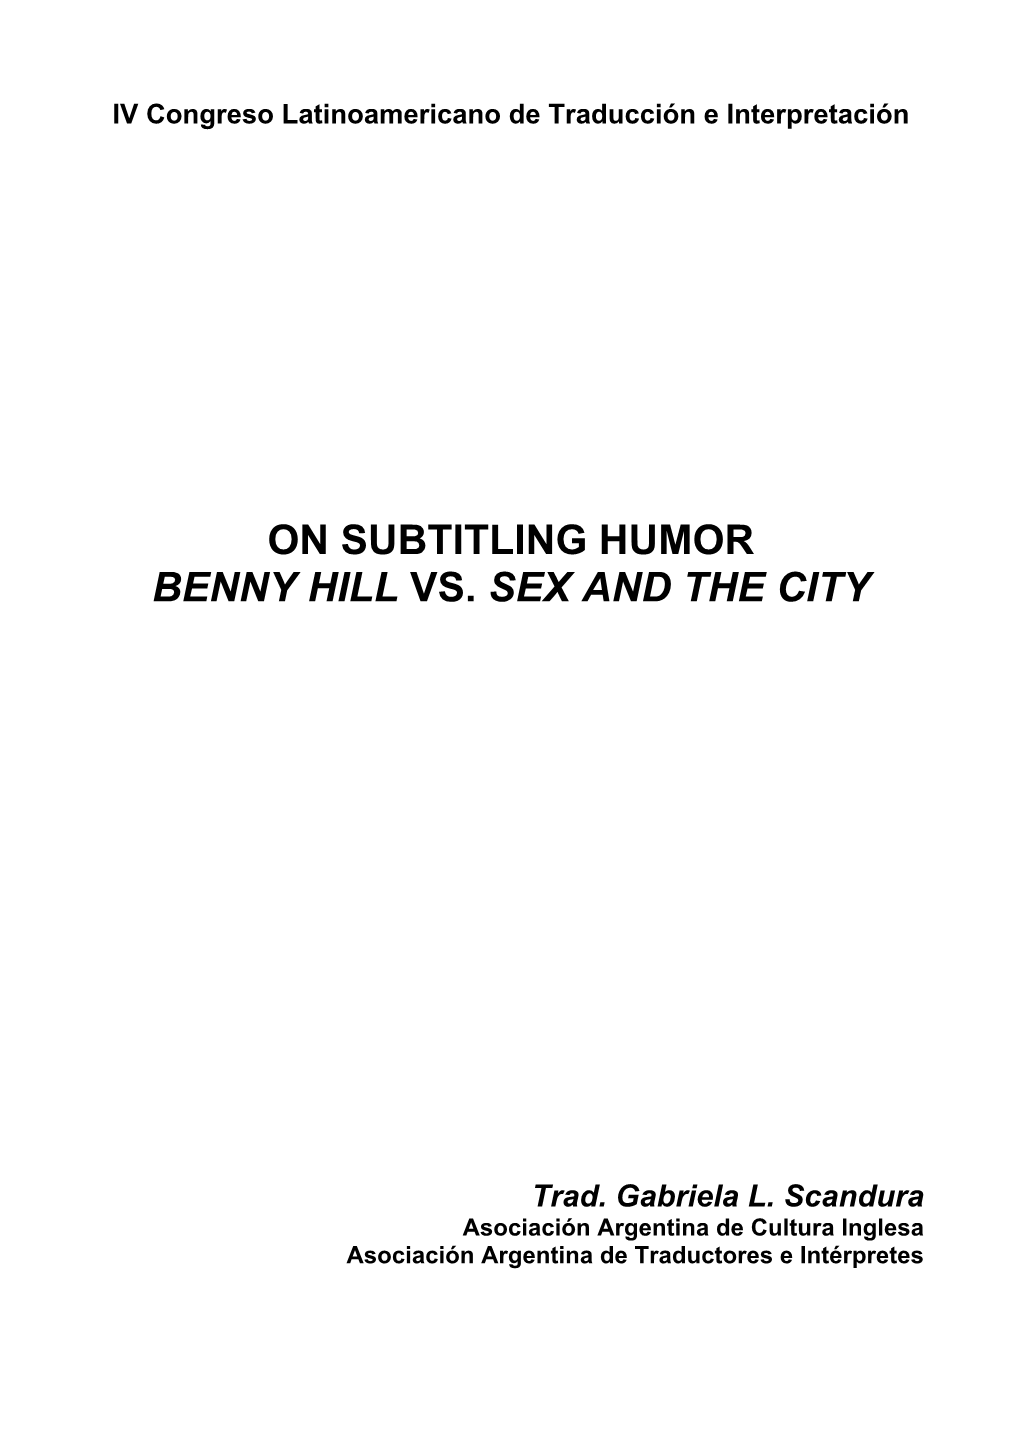 On Subtitling Humor Benny Hill Vs. Sex and the City